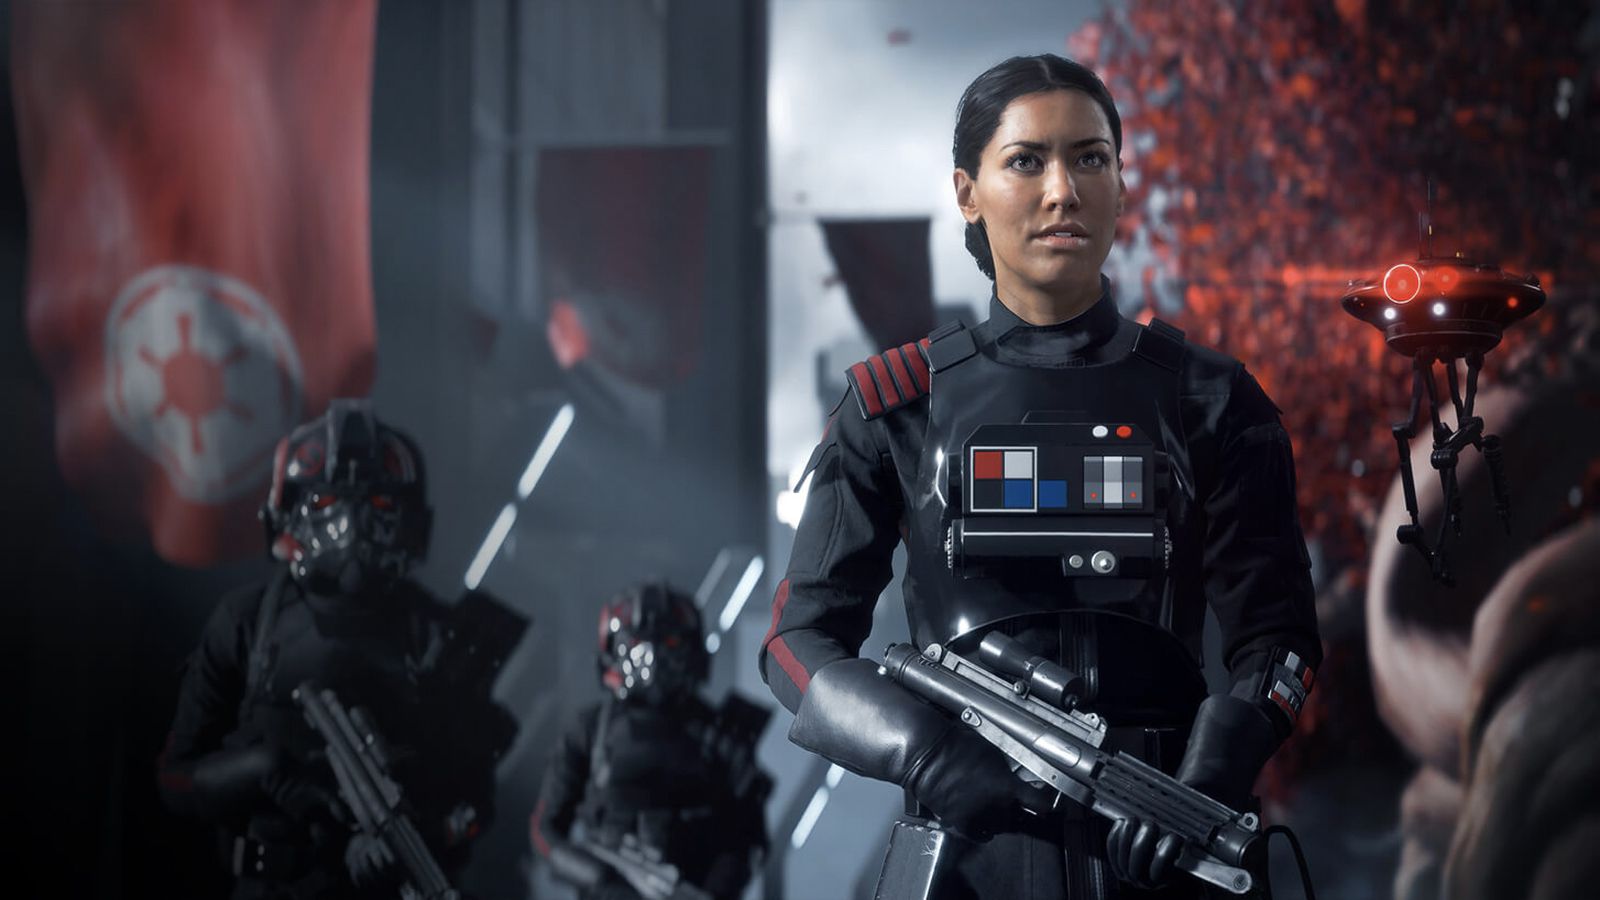 In Star Wars Battlefront 2's campaign, you're the bad guy